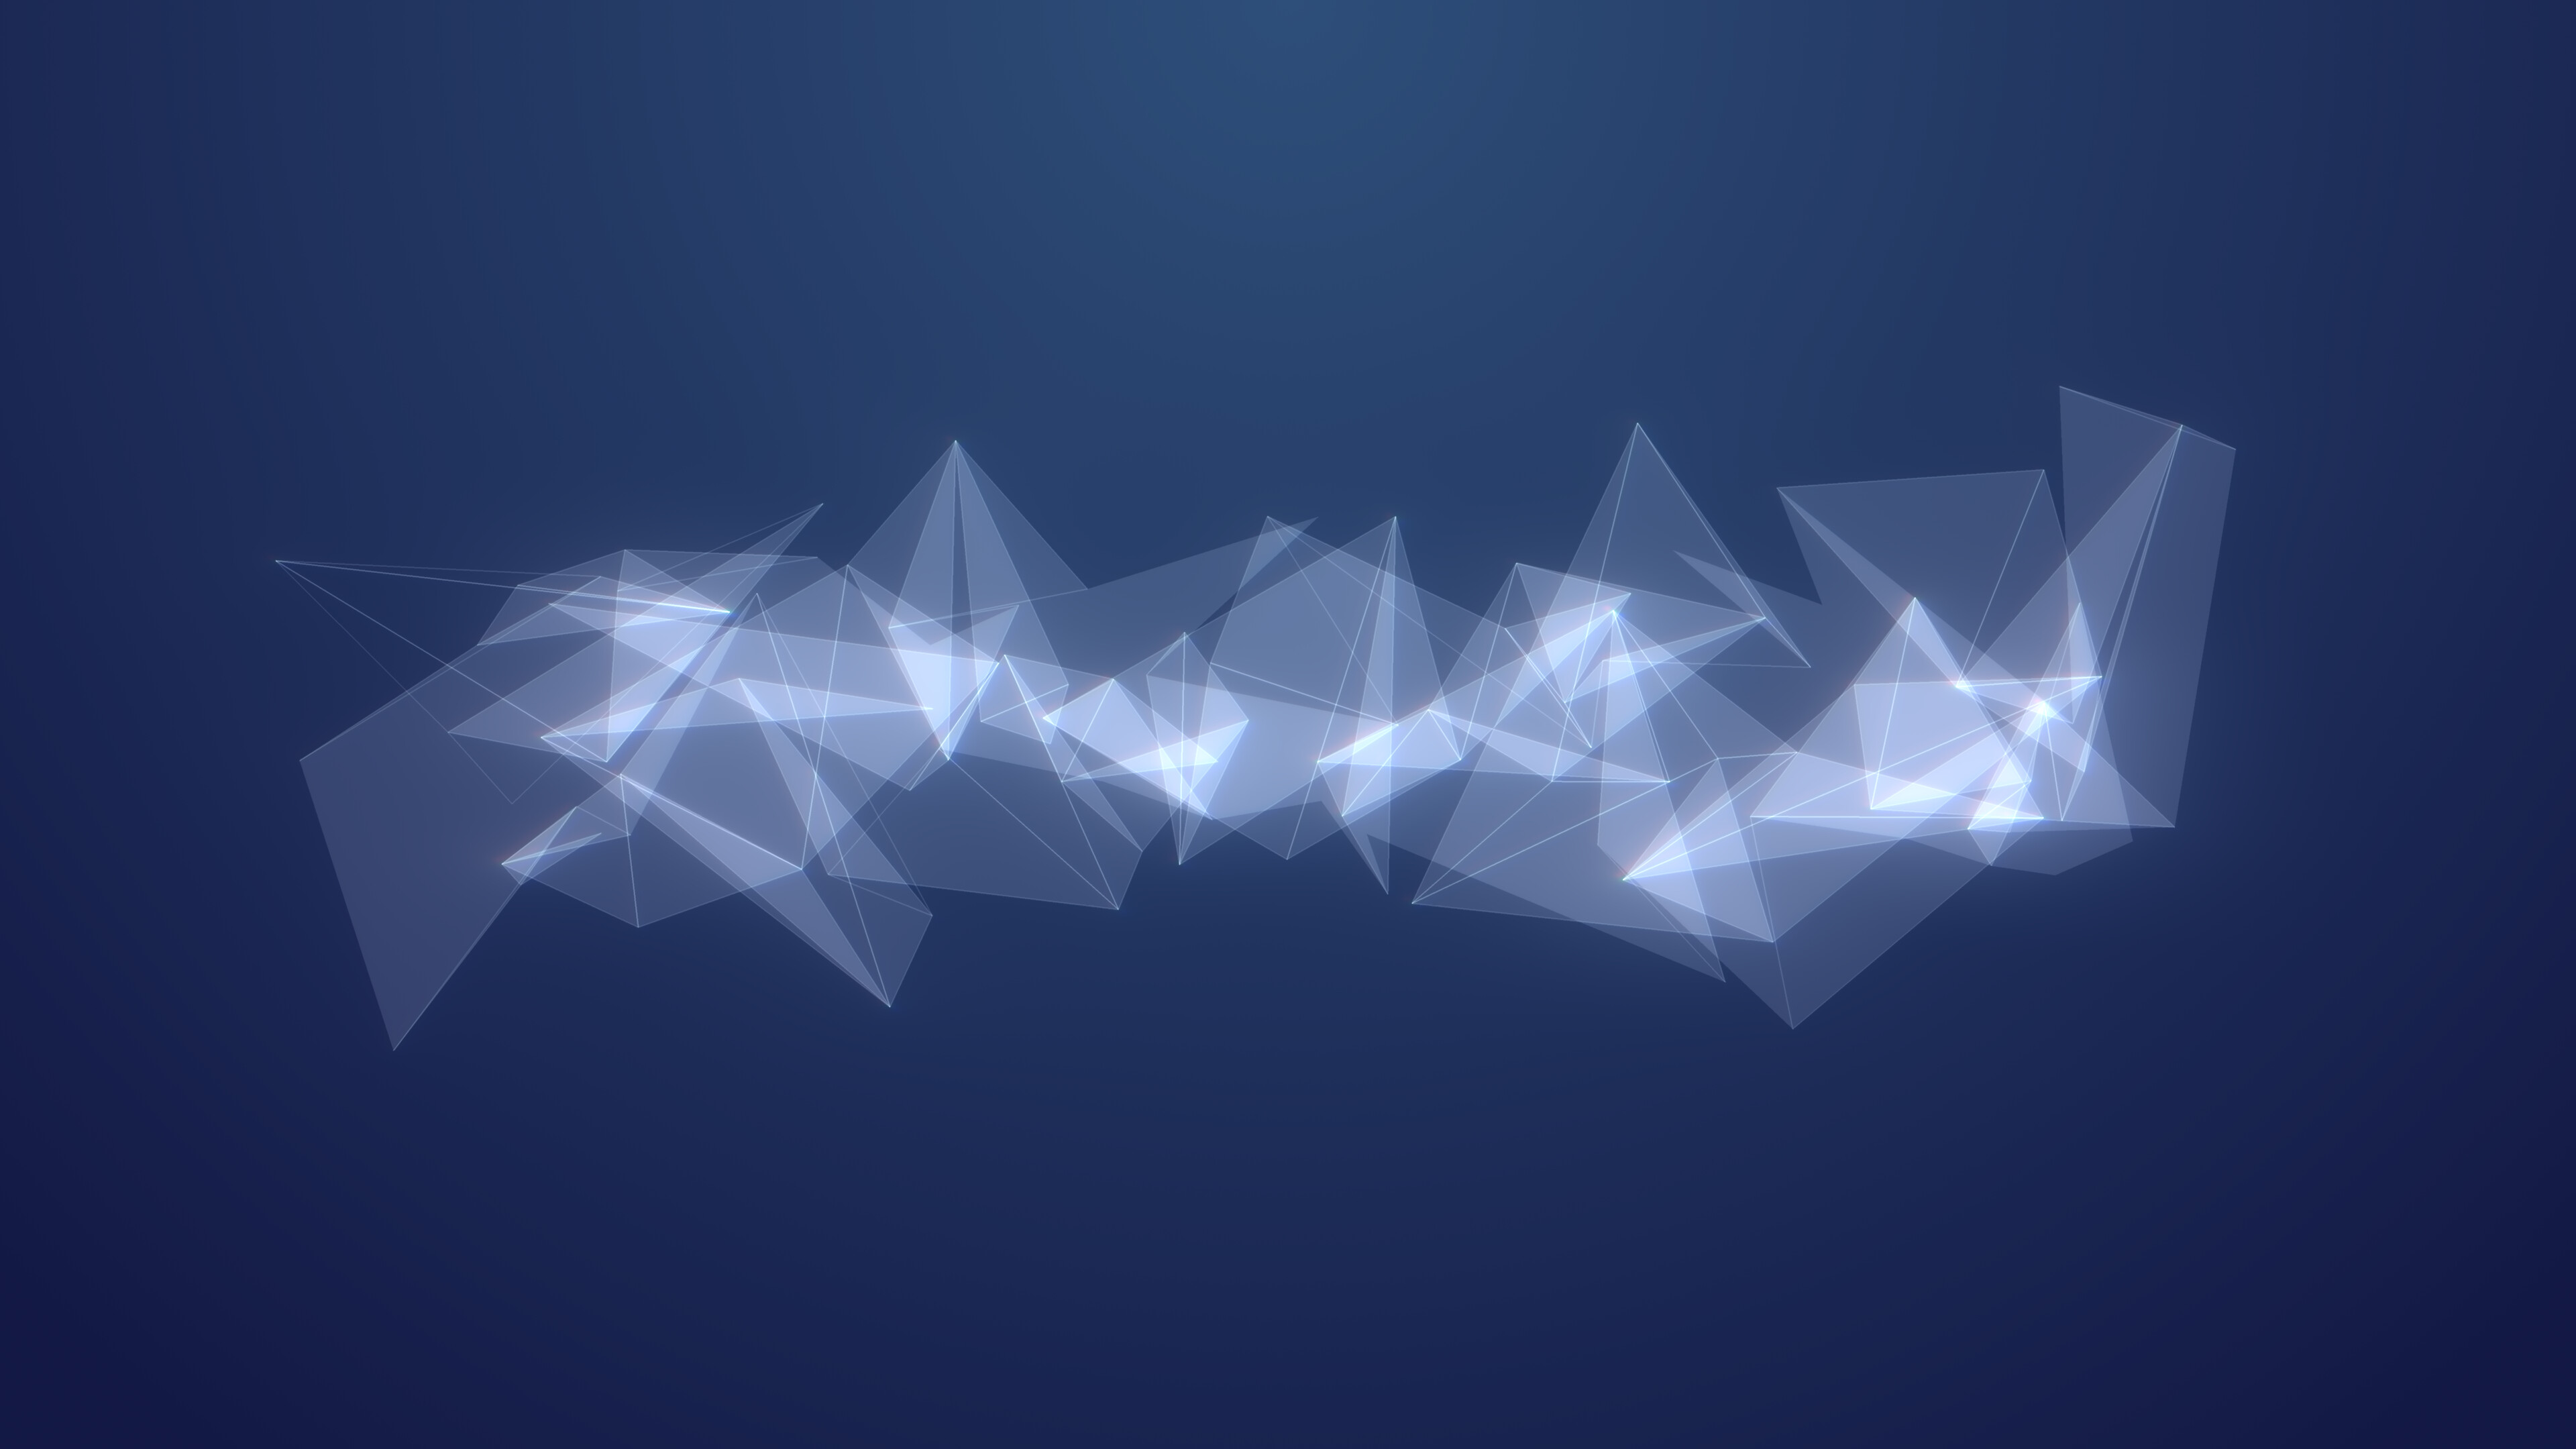 Geometric Abstract: Angle, Lines, Congruent, Dimensions, Identical shape. 3840x2160 4K Wallpaper.